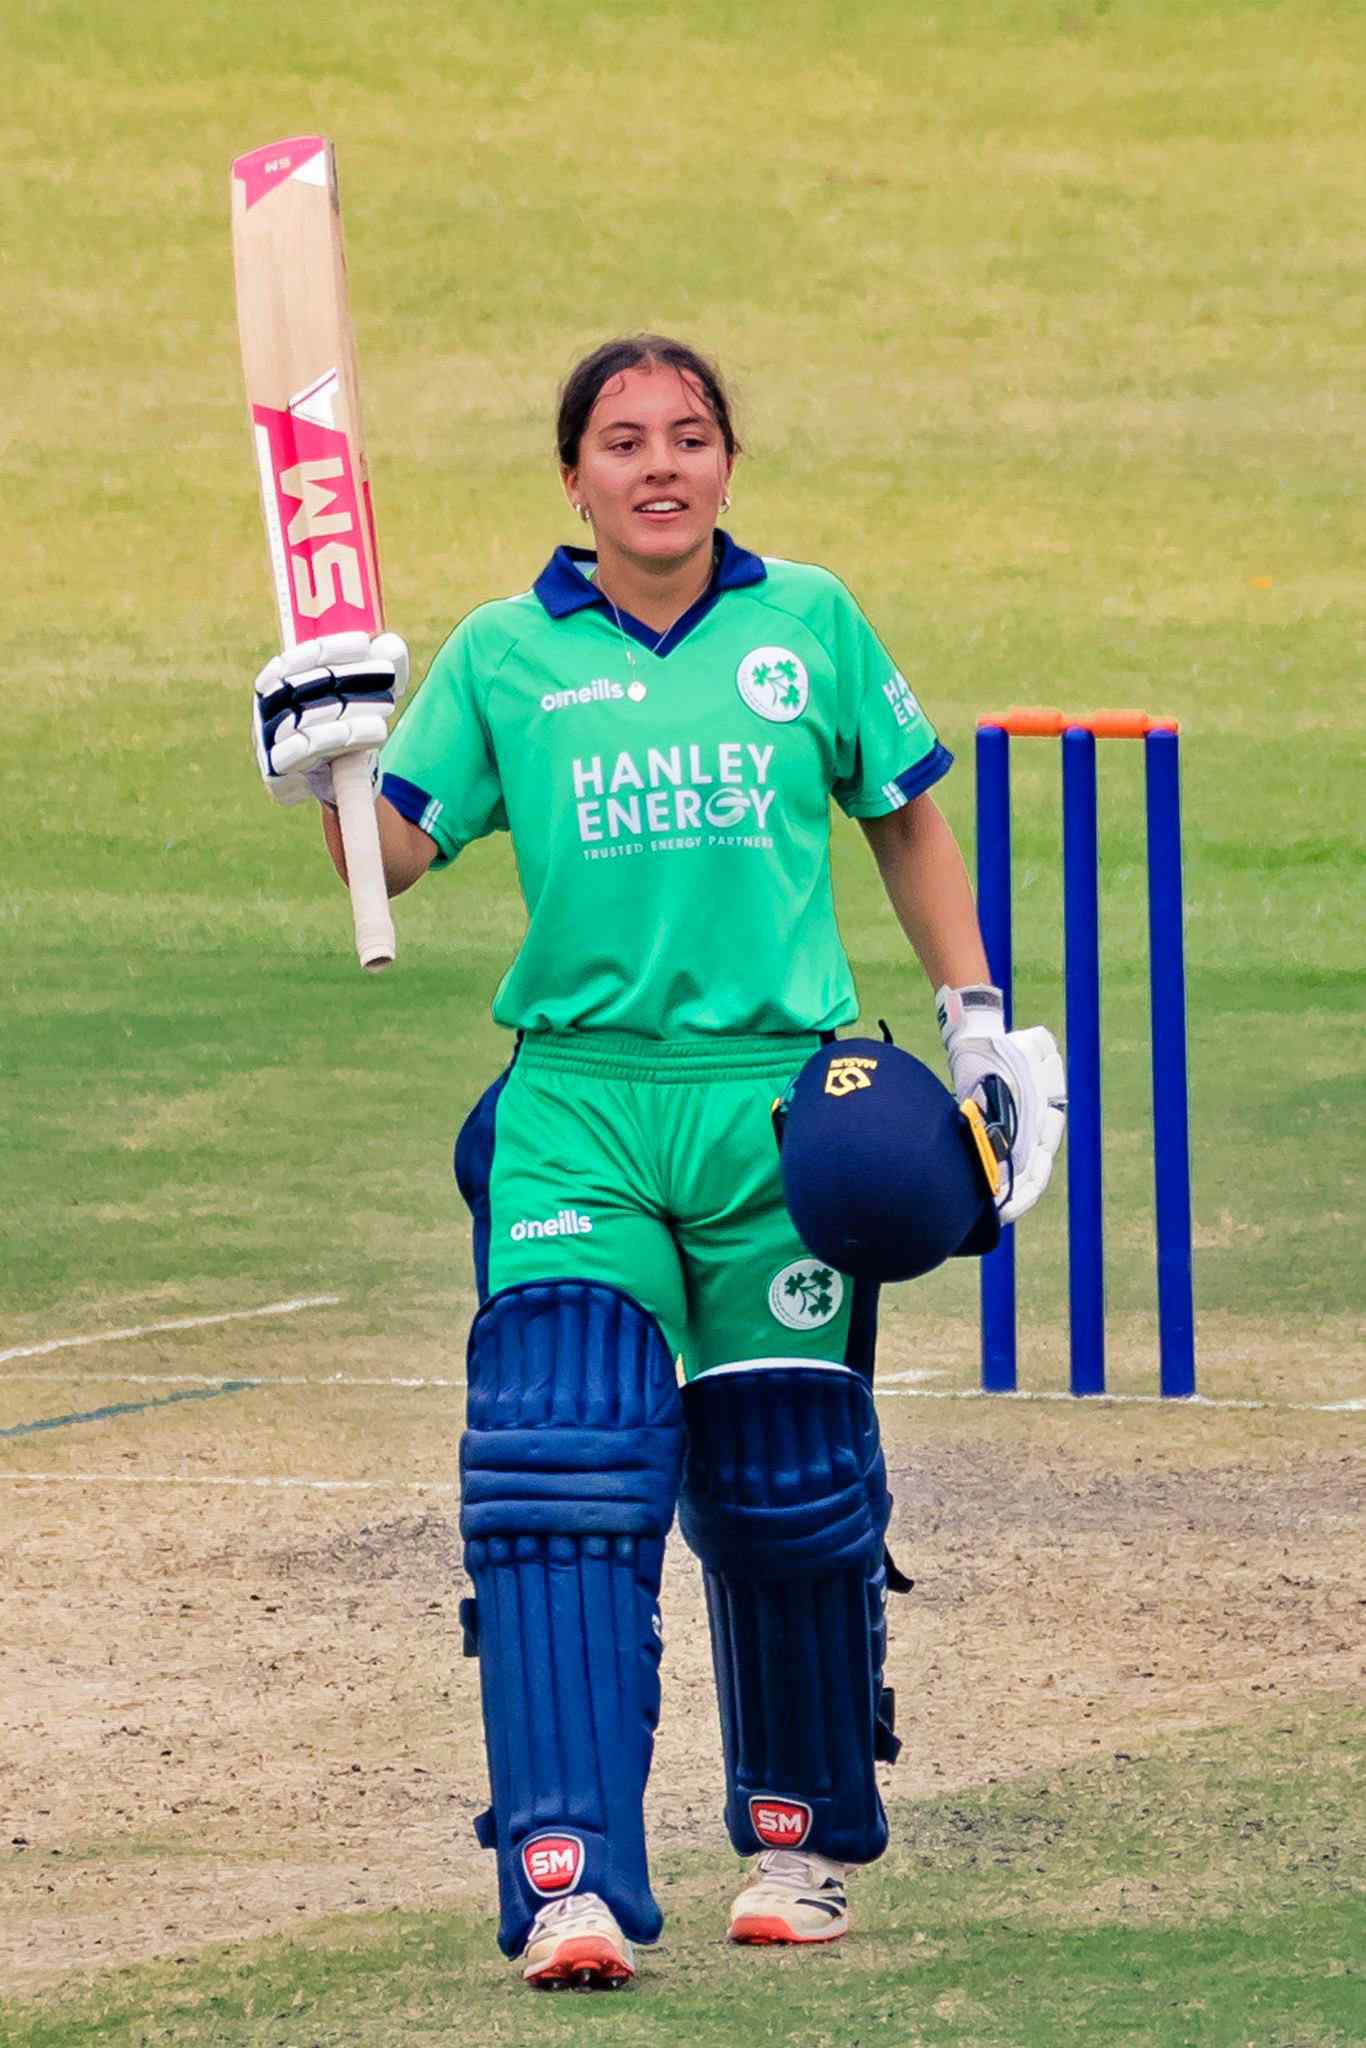 Amy Hunter is youngest to hit century in international cricket